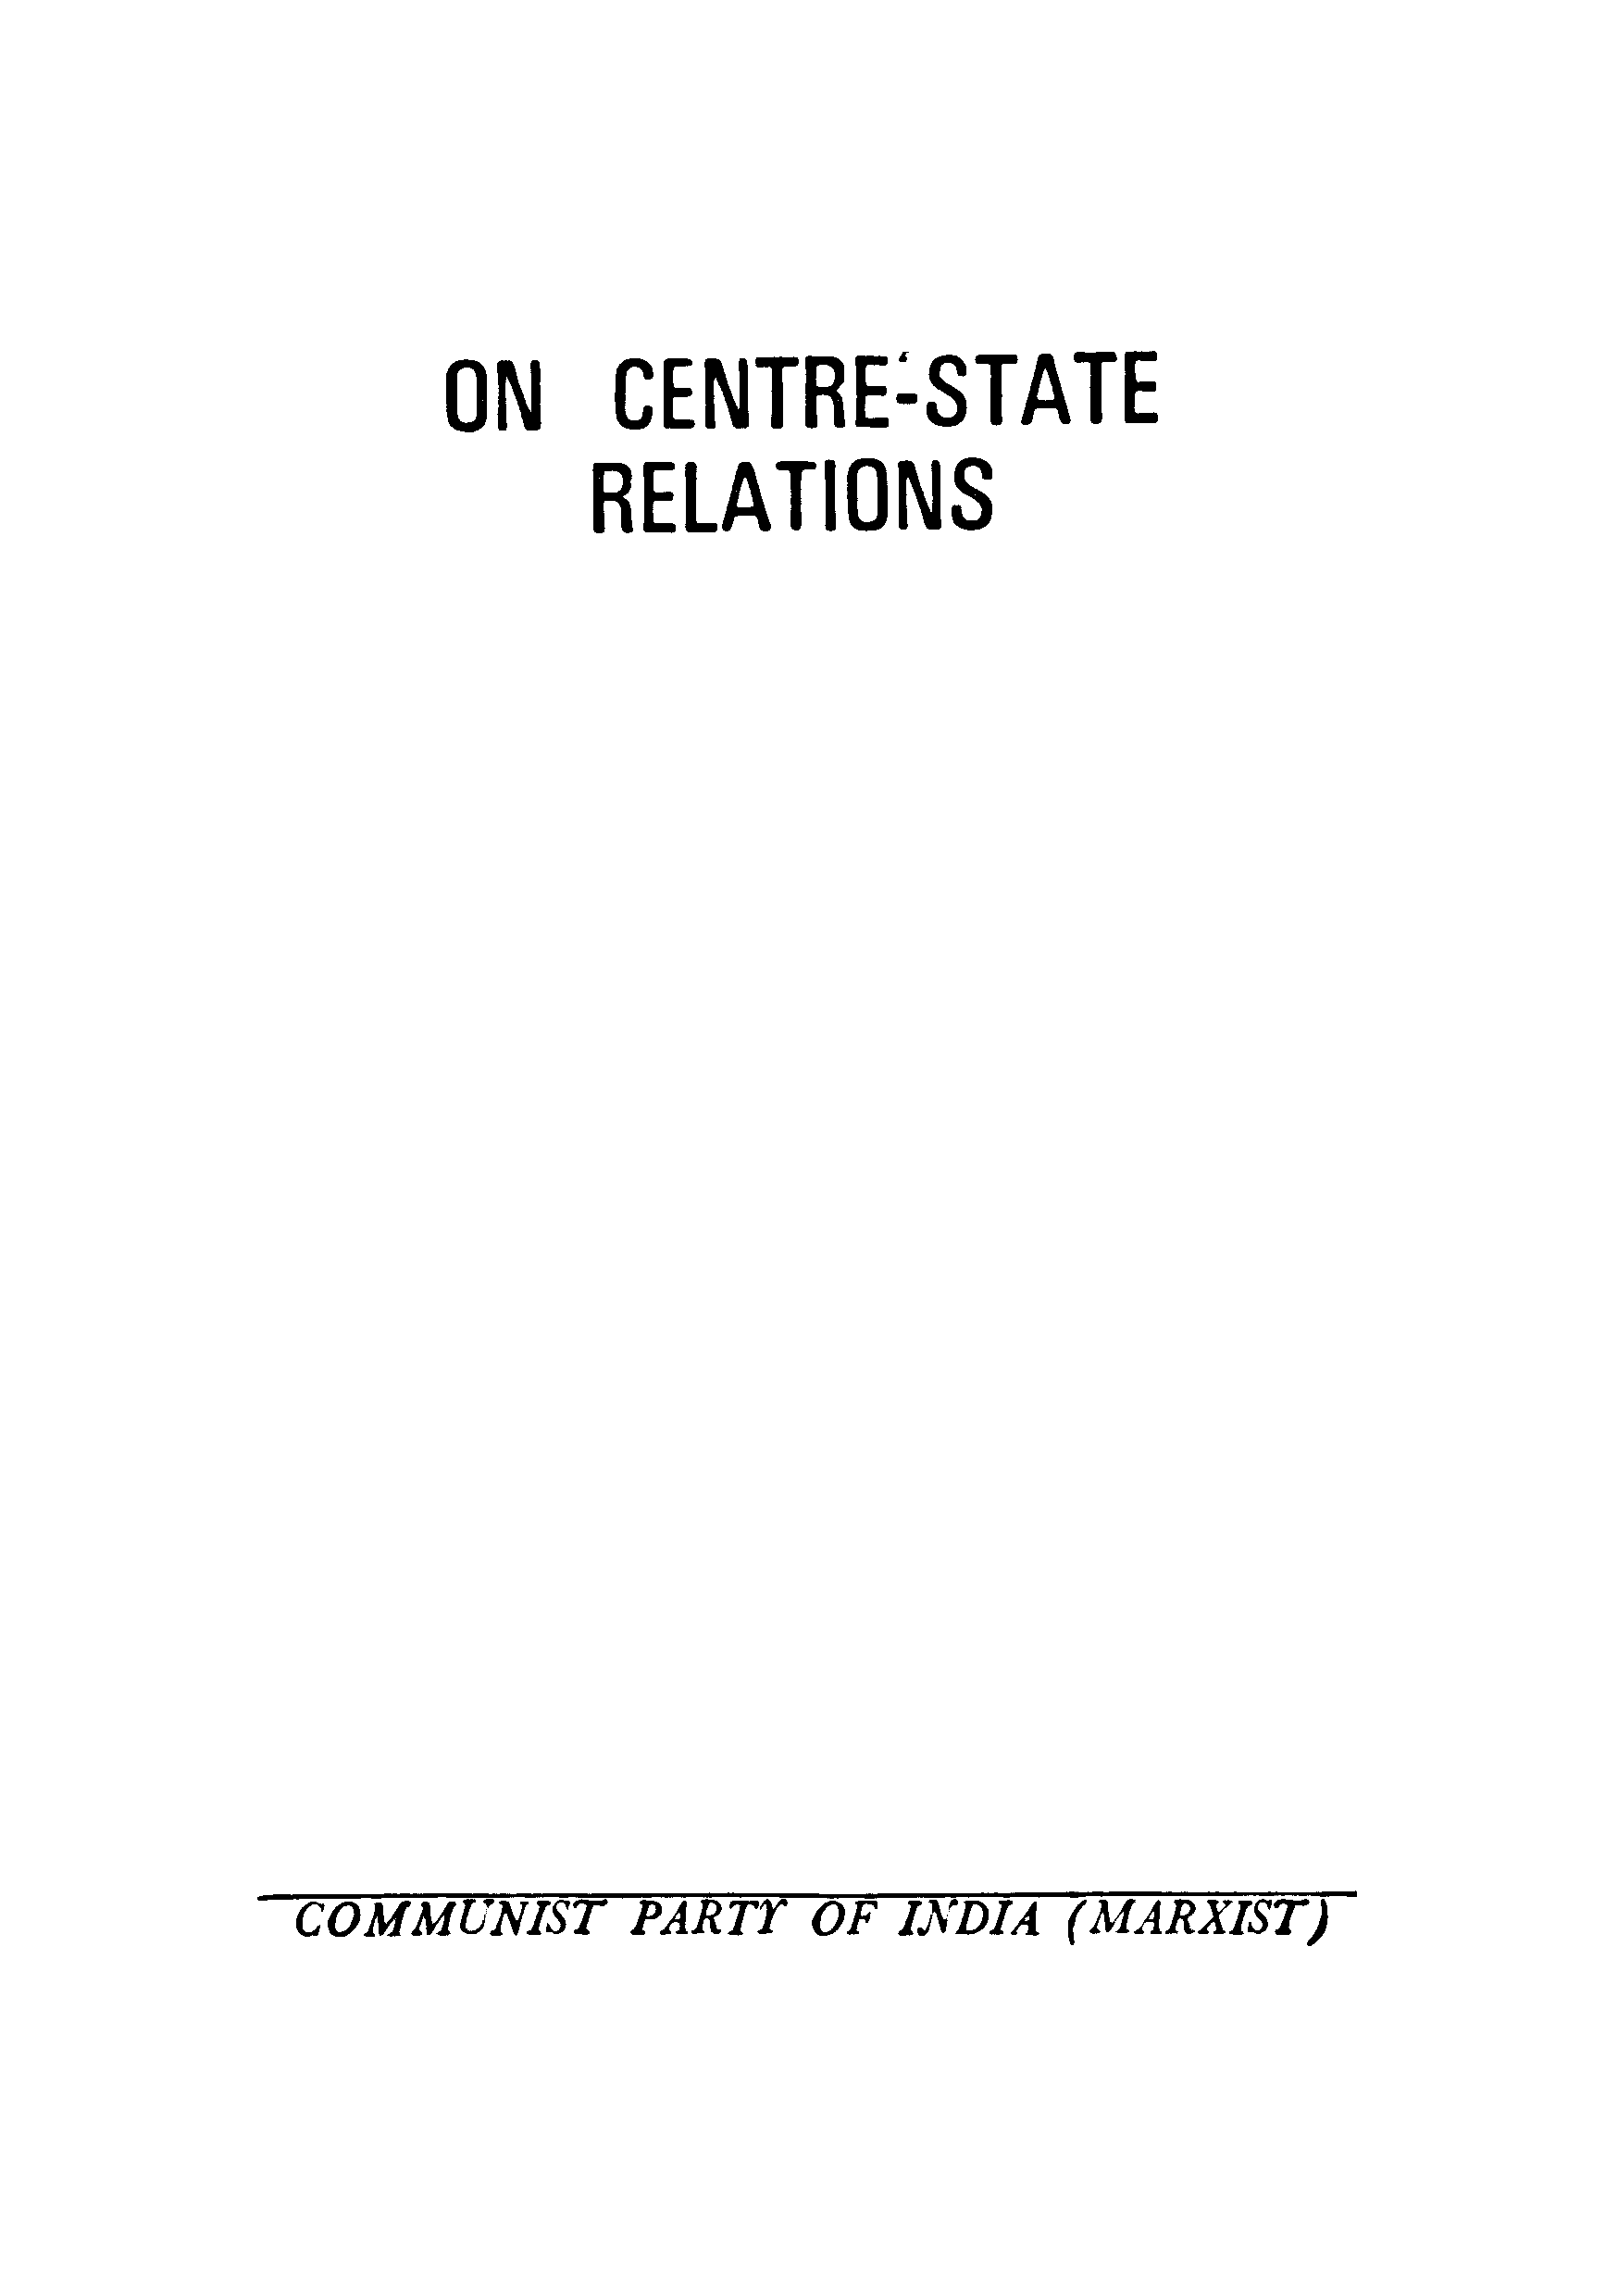 On Centare State Relations